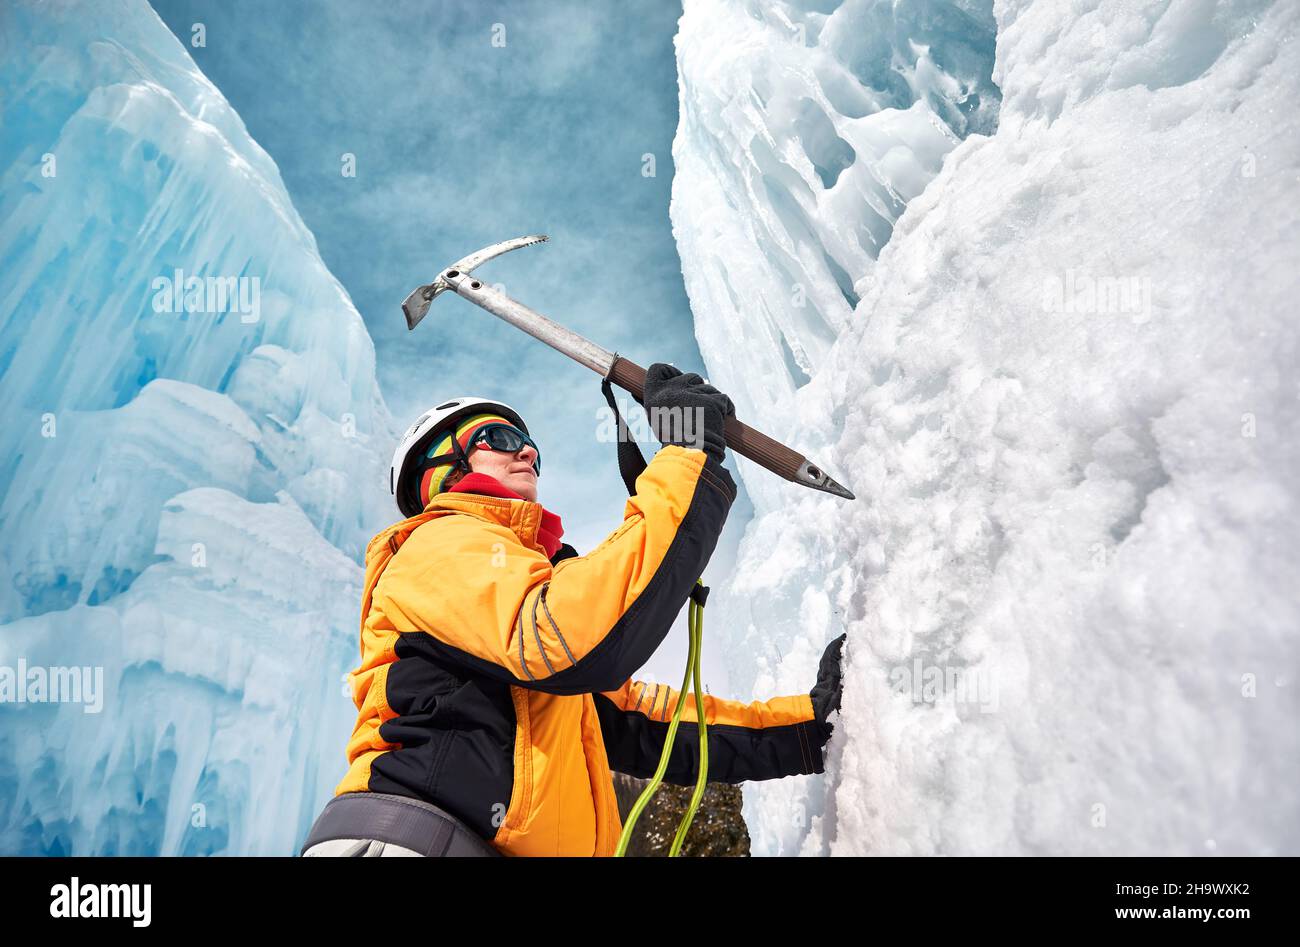 Woman is climbing frozen waterfall with ice axe in orange jacket in the mountains. Sport mountaineering and alpinism concept. Stock Photo